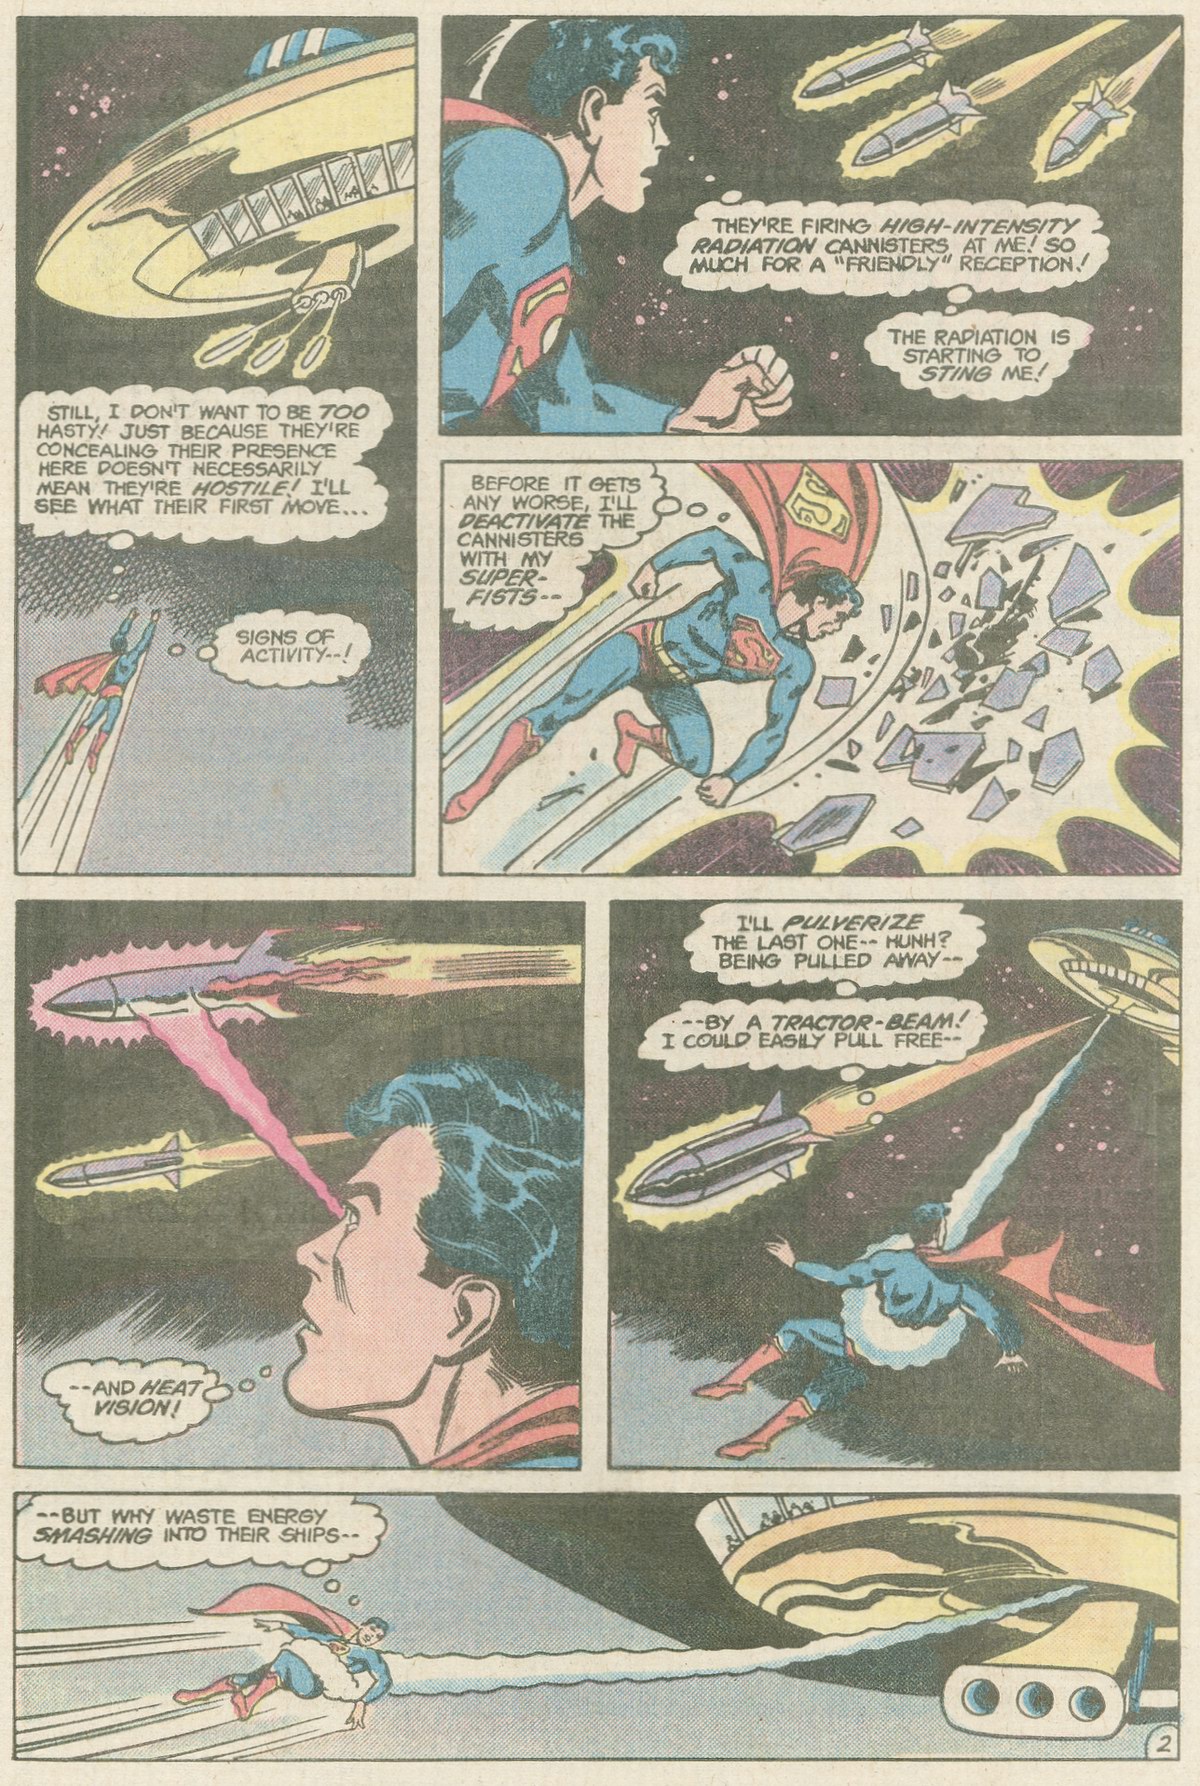 The New Adventures of Superboy 40 Page 2